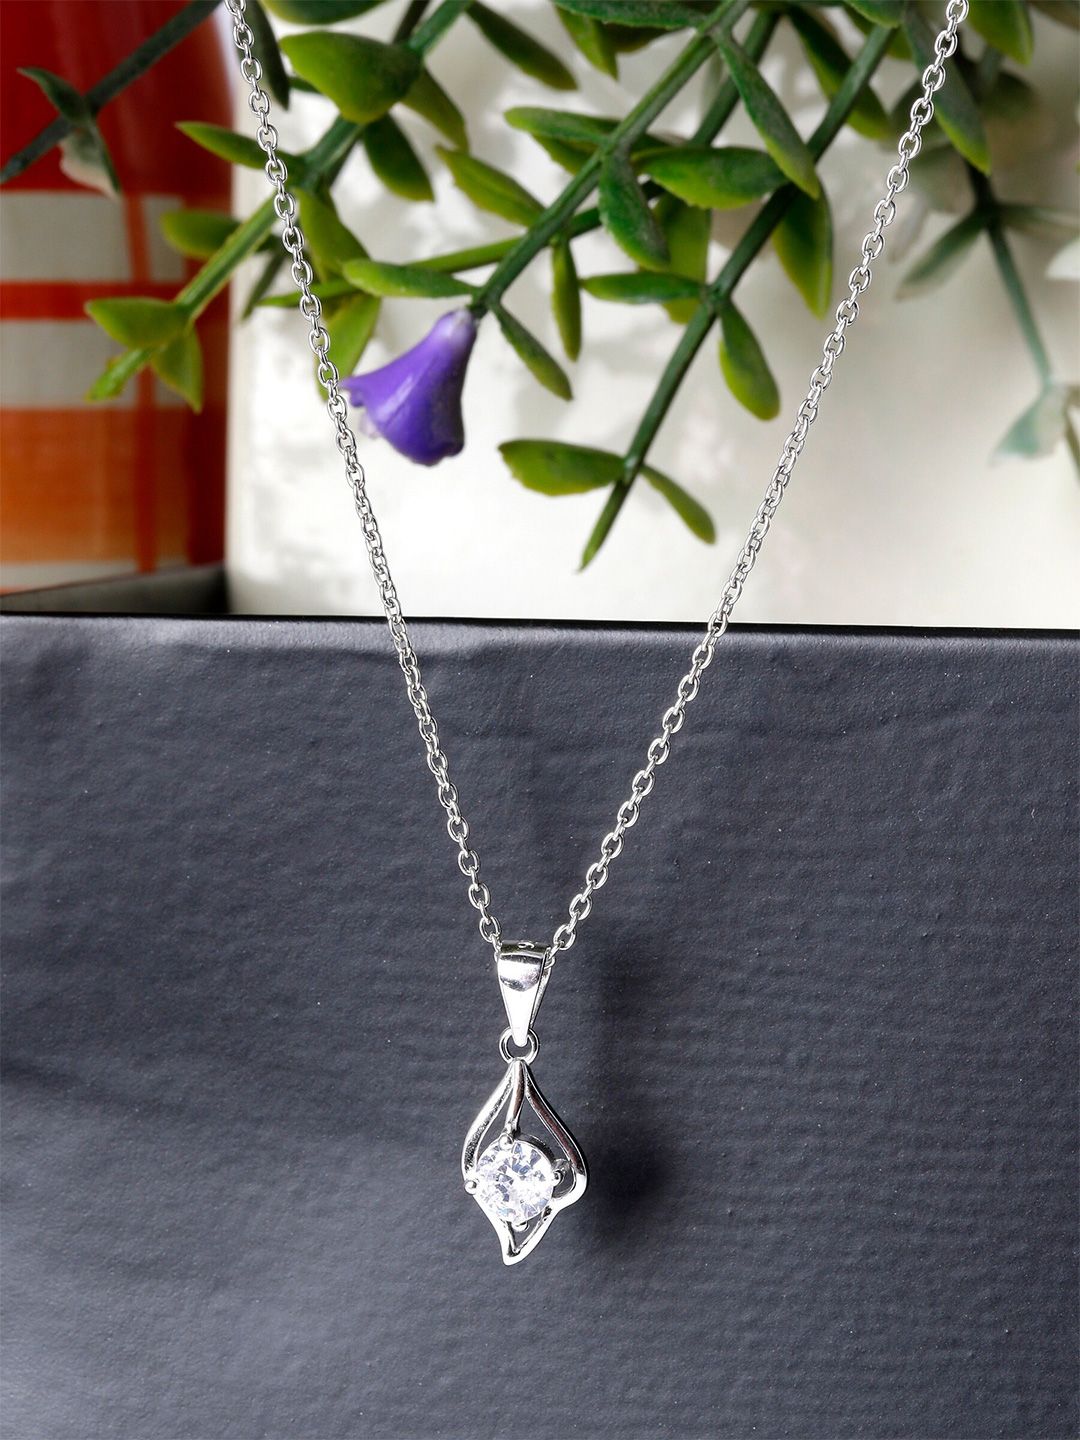 GIVA Silver-Toned 925 Sterling Silver Rhodium-Plated Necklace Price in India